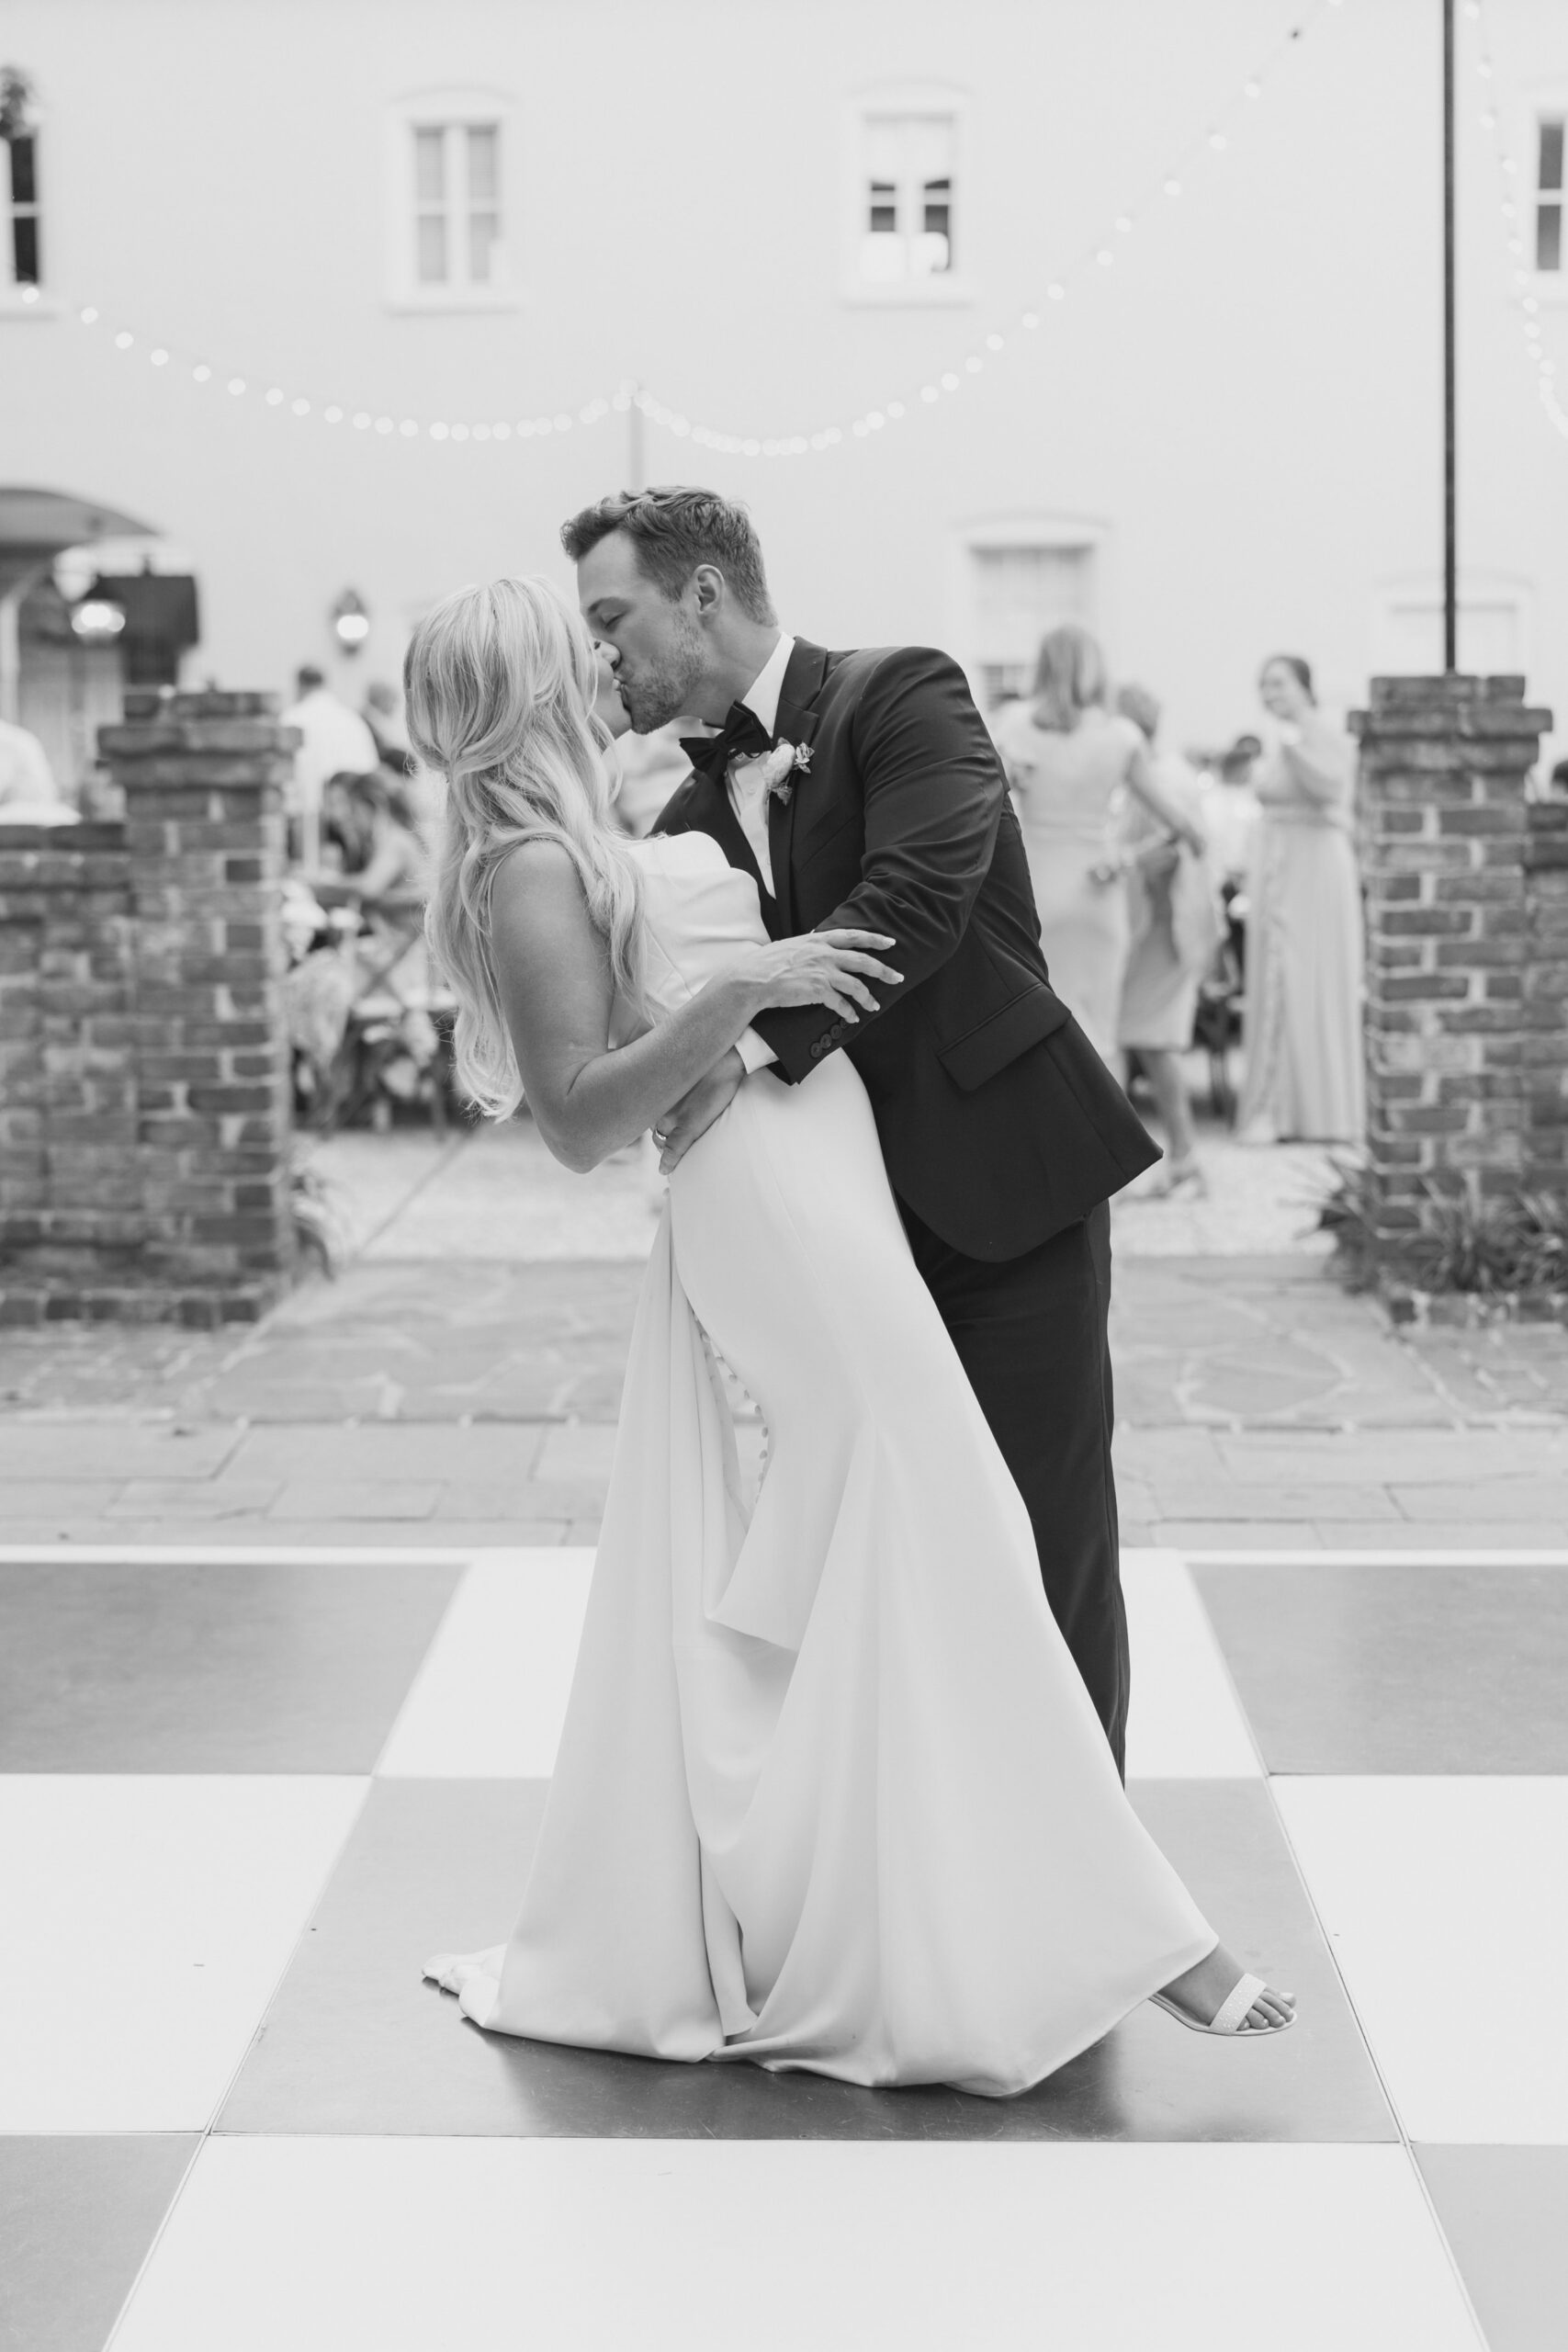 black and white wedding photo. Groom dips bride back for a sweet kiss on the dance floor.